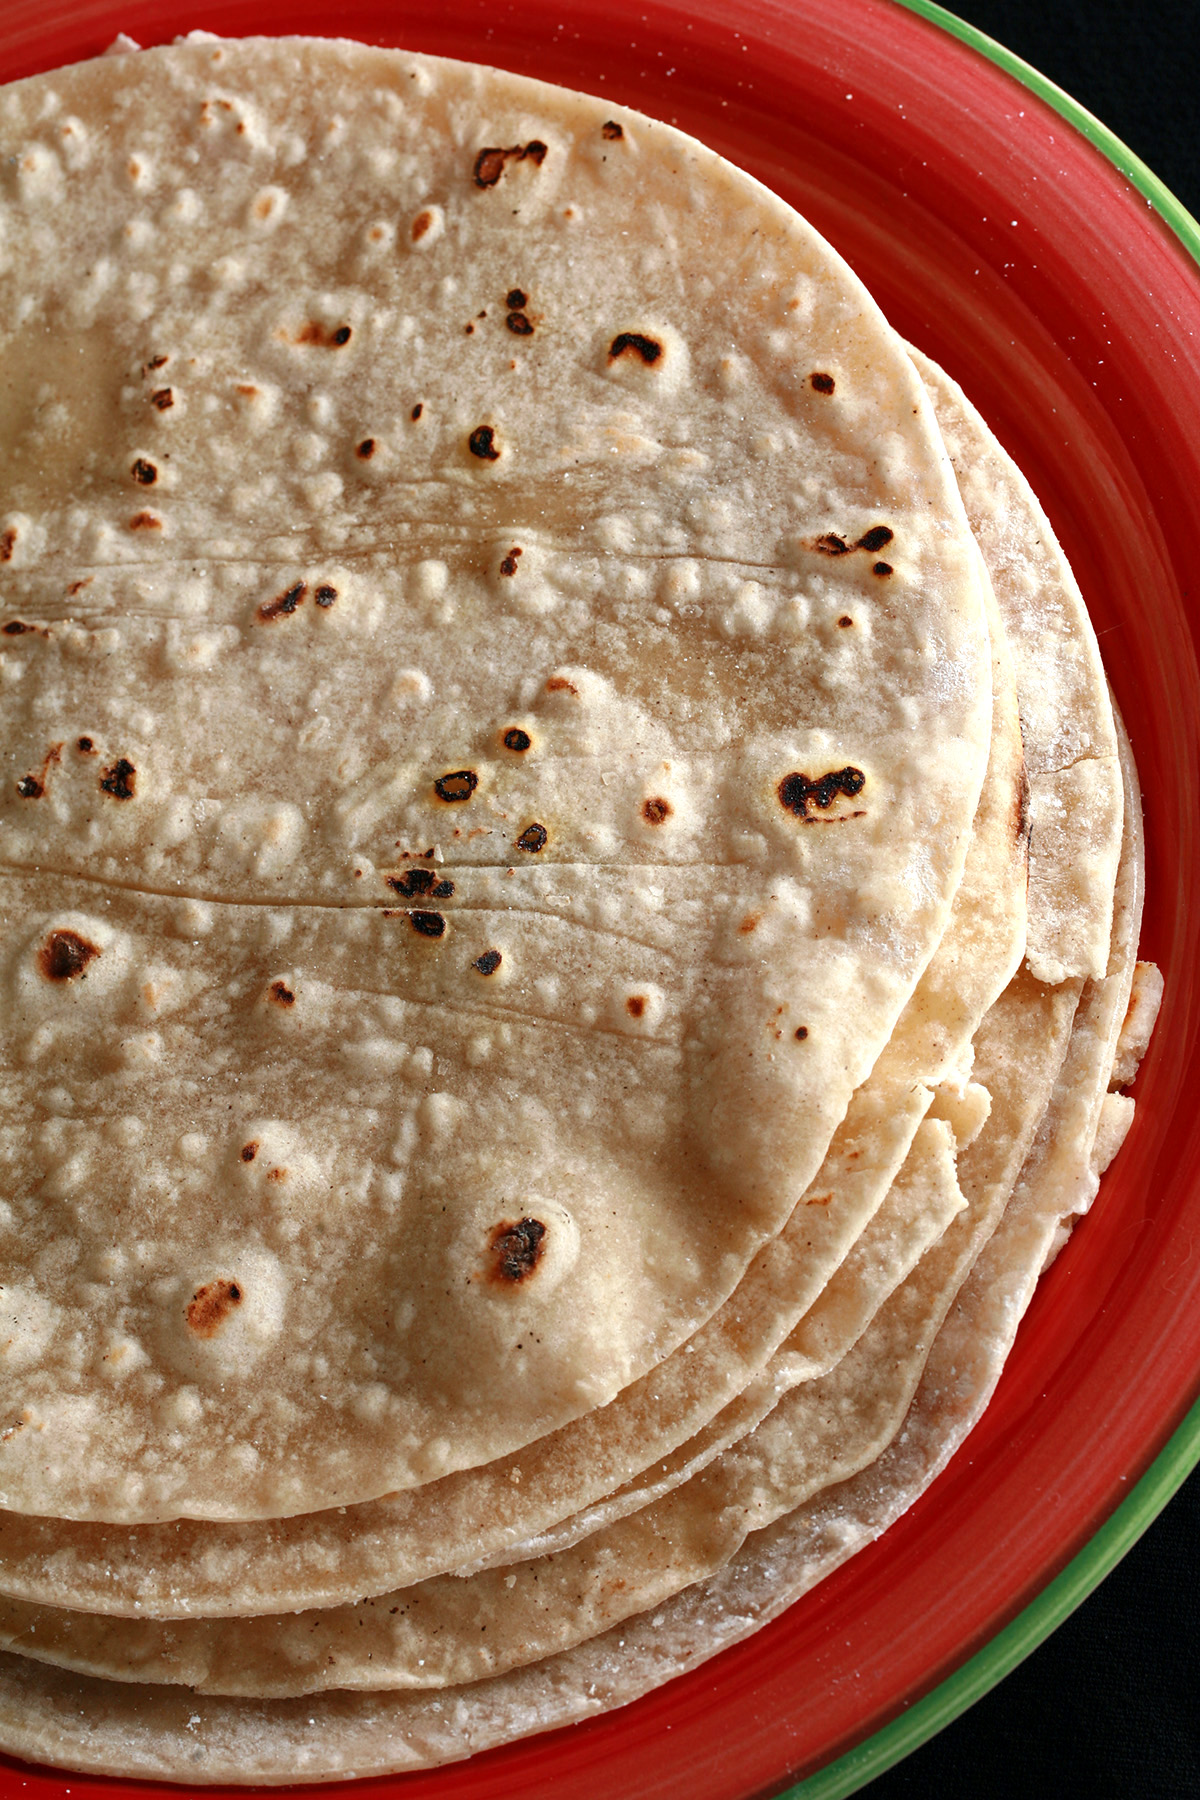 A stack of gluten free tortillas on a red plate.